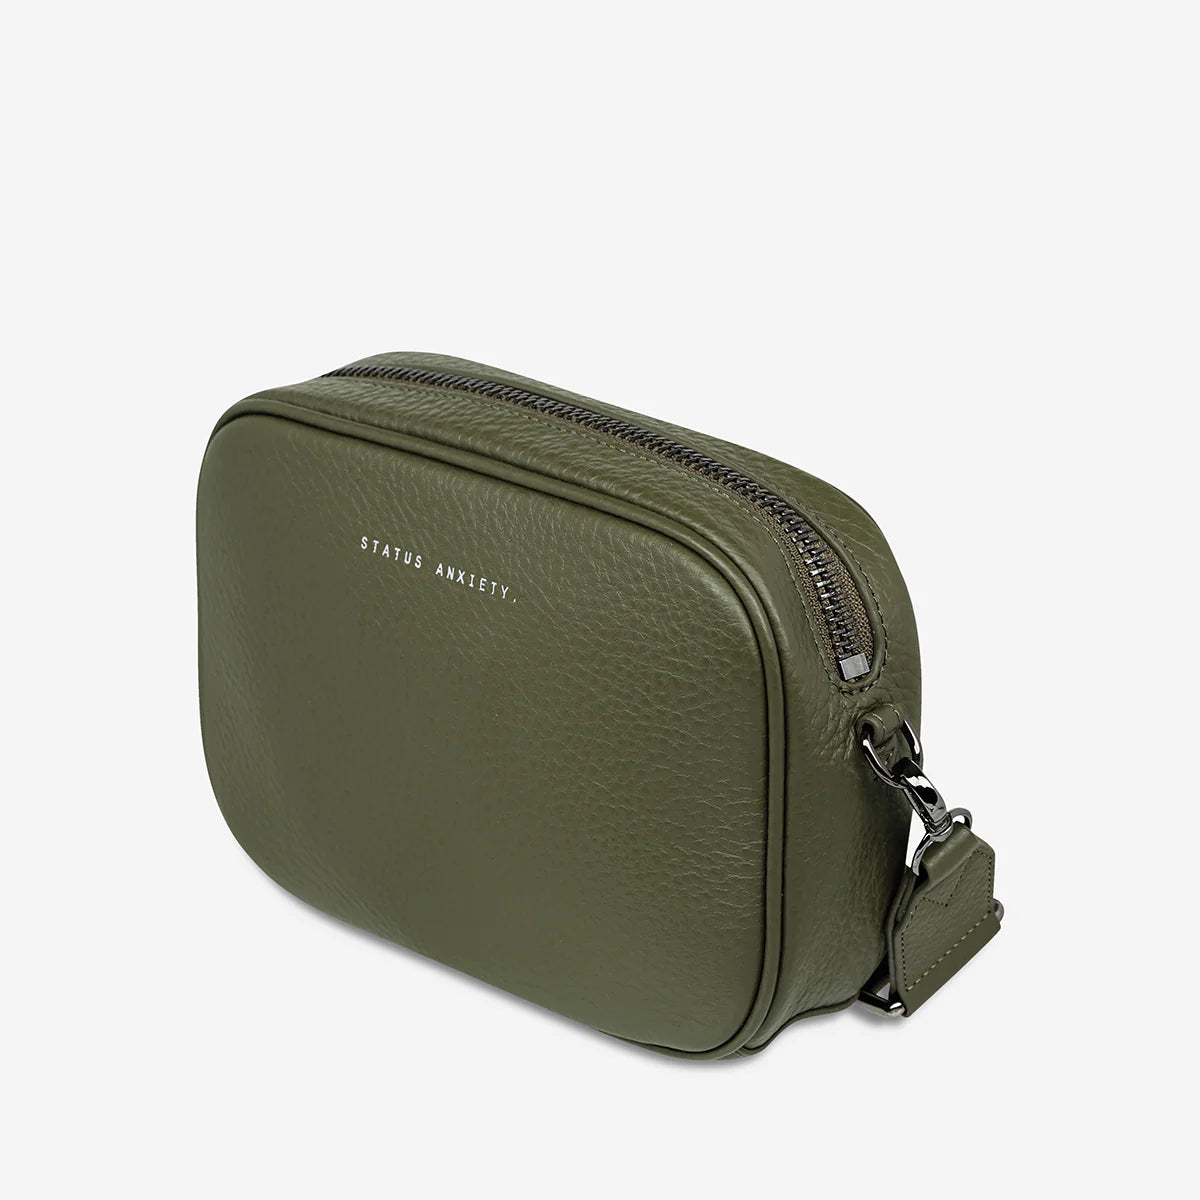 Status Anxiety Bag - Plunder - Khaki with Webbed Strap